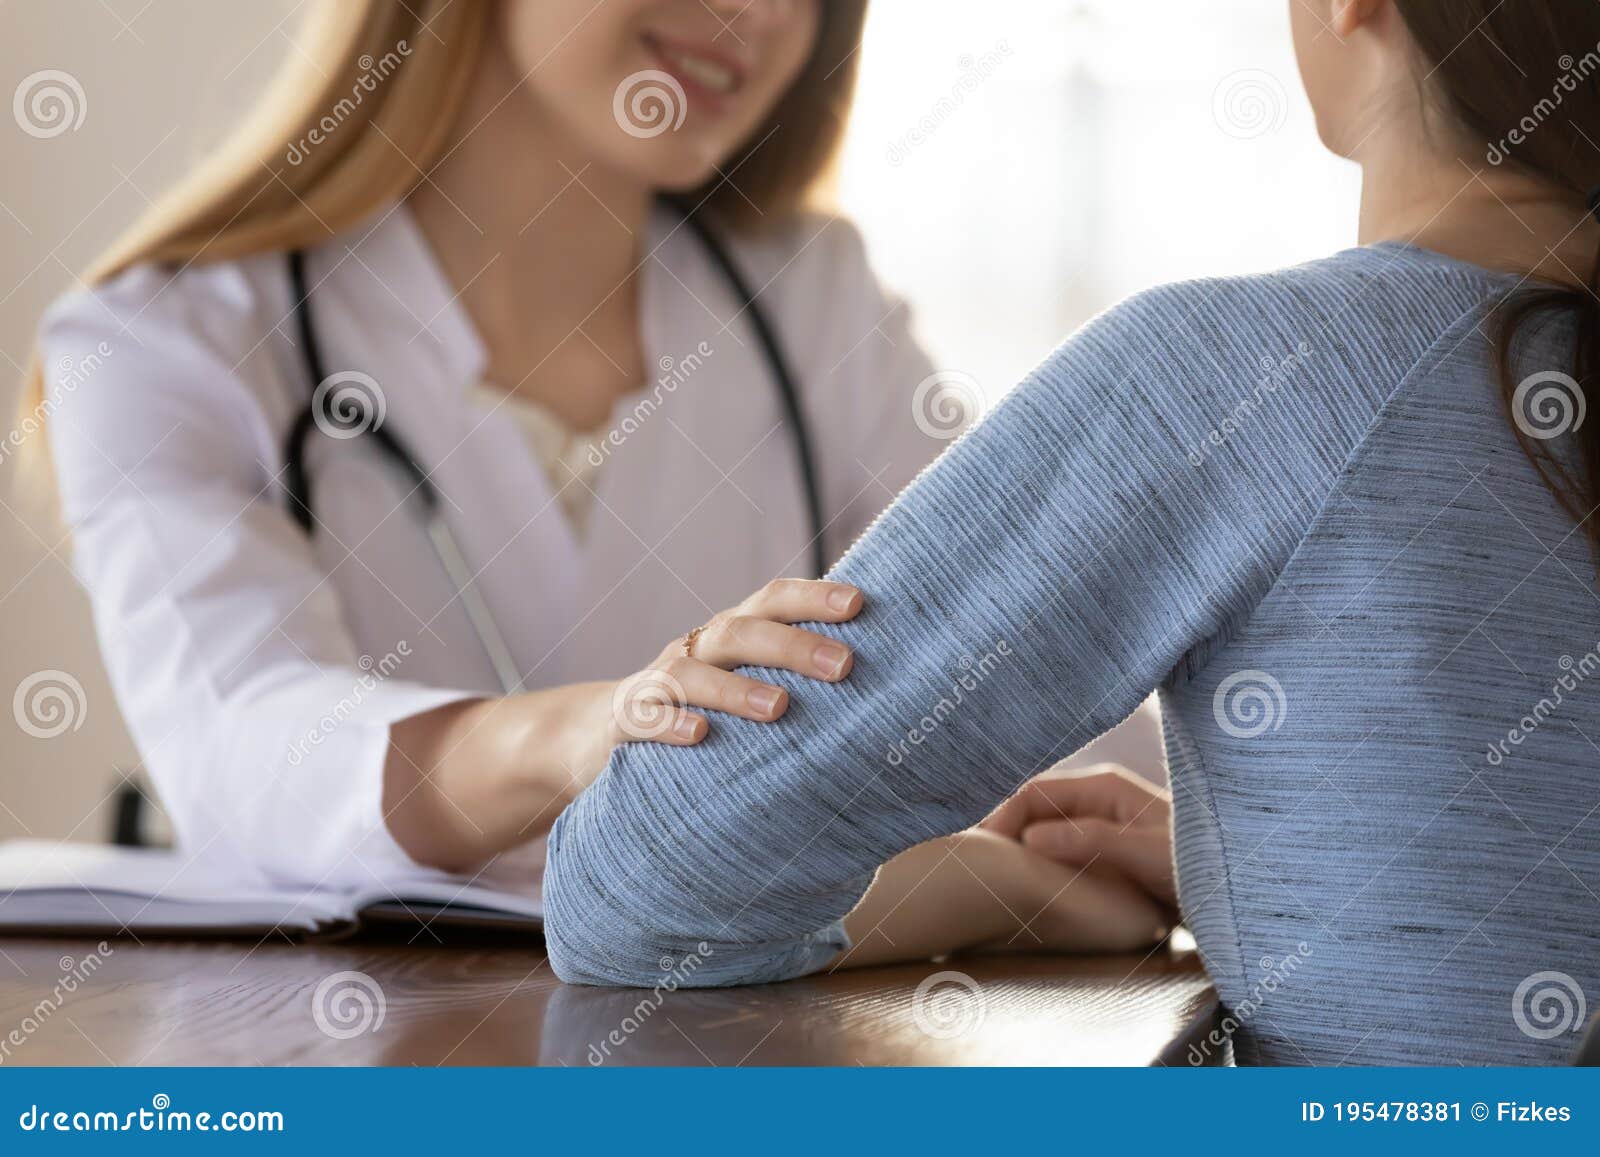 caring female doctor comforting young woman patient at meeting